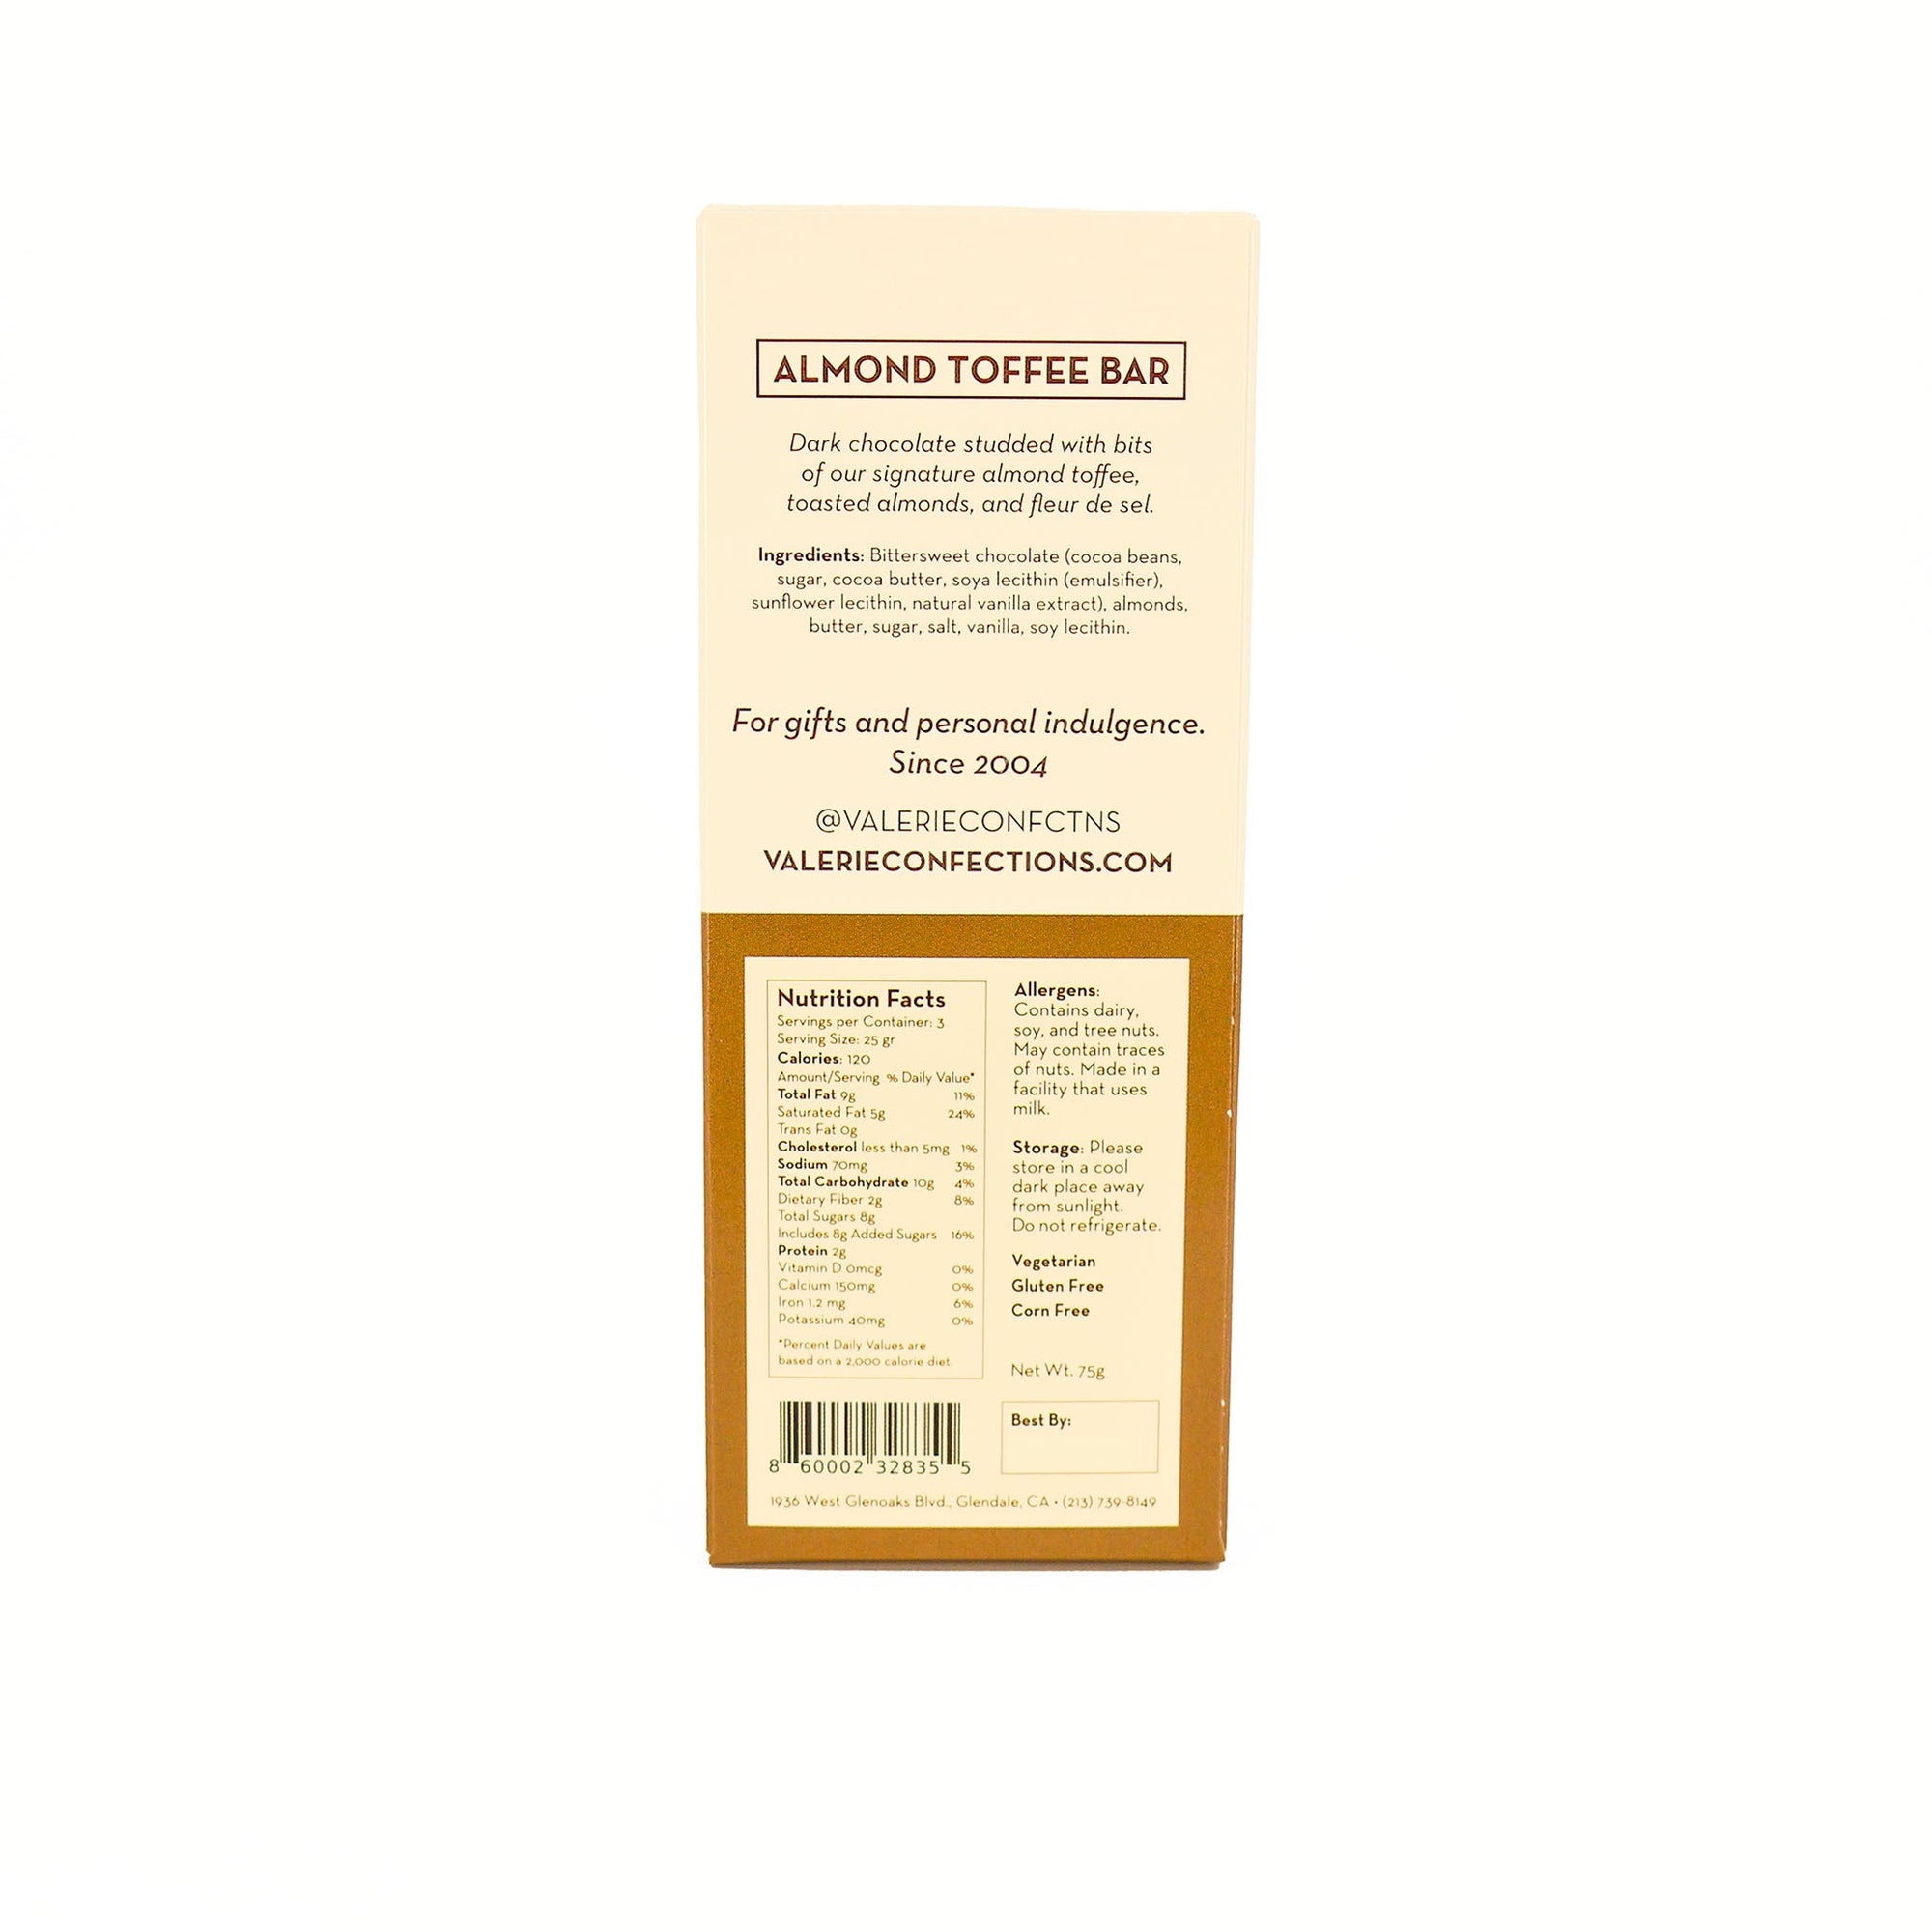 Back of Almond Toffee Bar packaging showing product description, ingredients, nutritional facts, allergen information, and contact details.